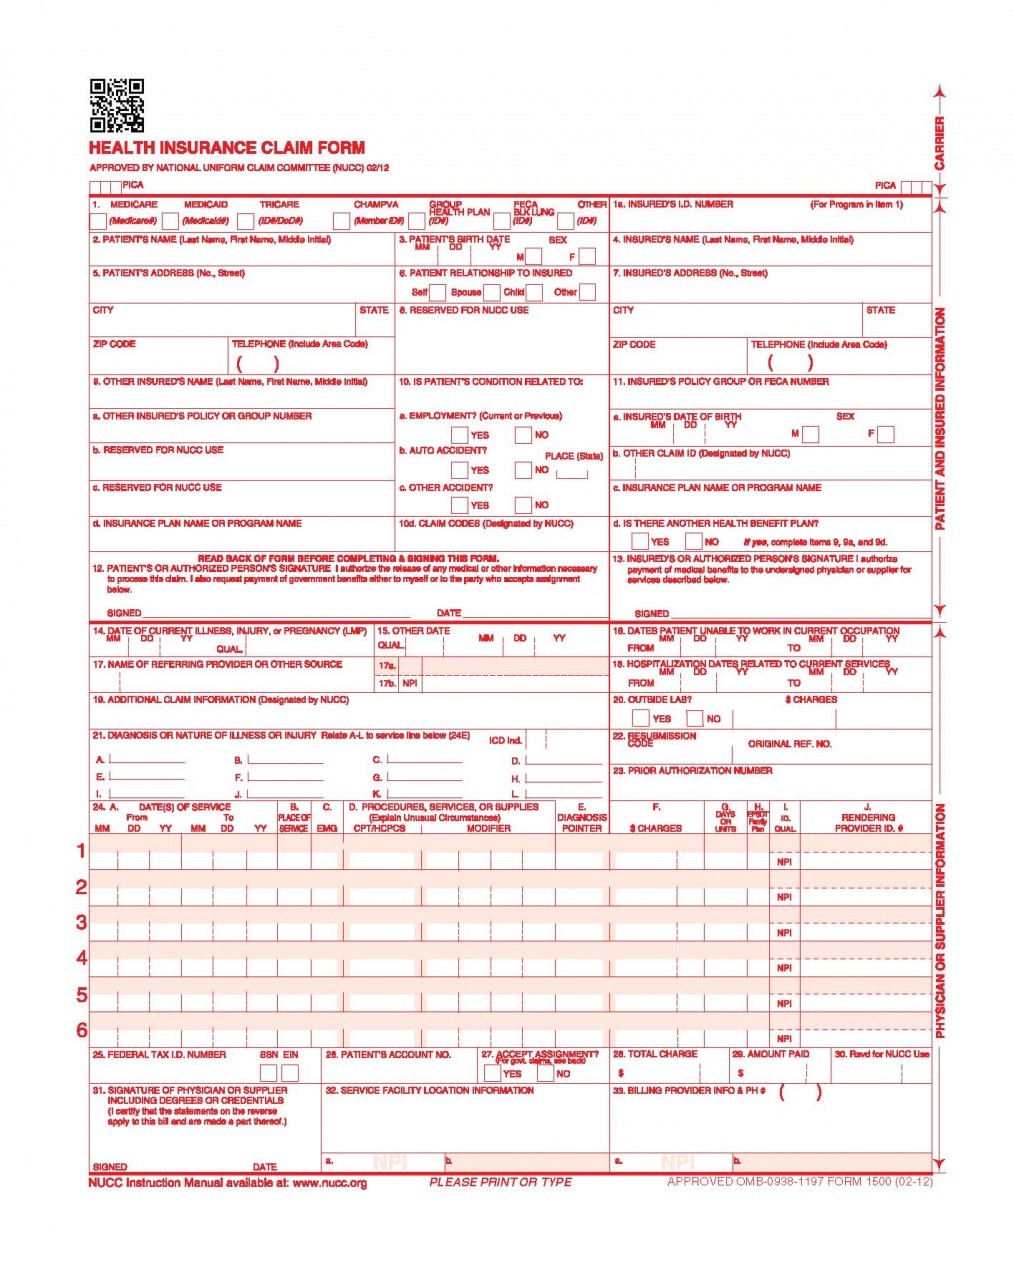 What Is A Cms 1500 Form